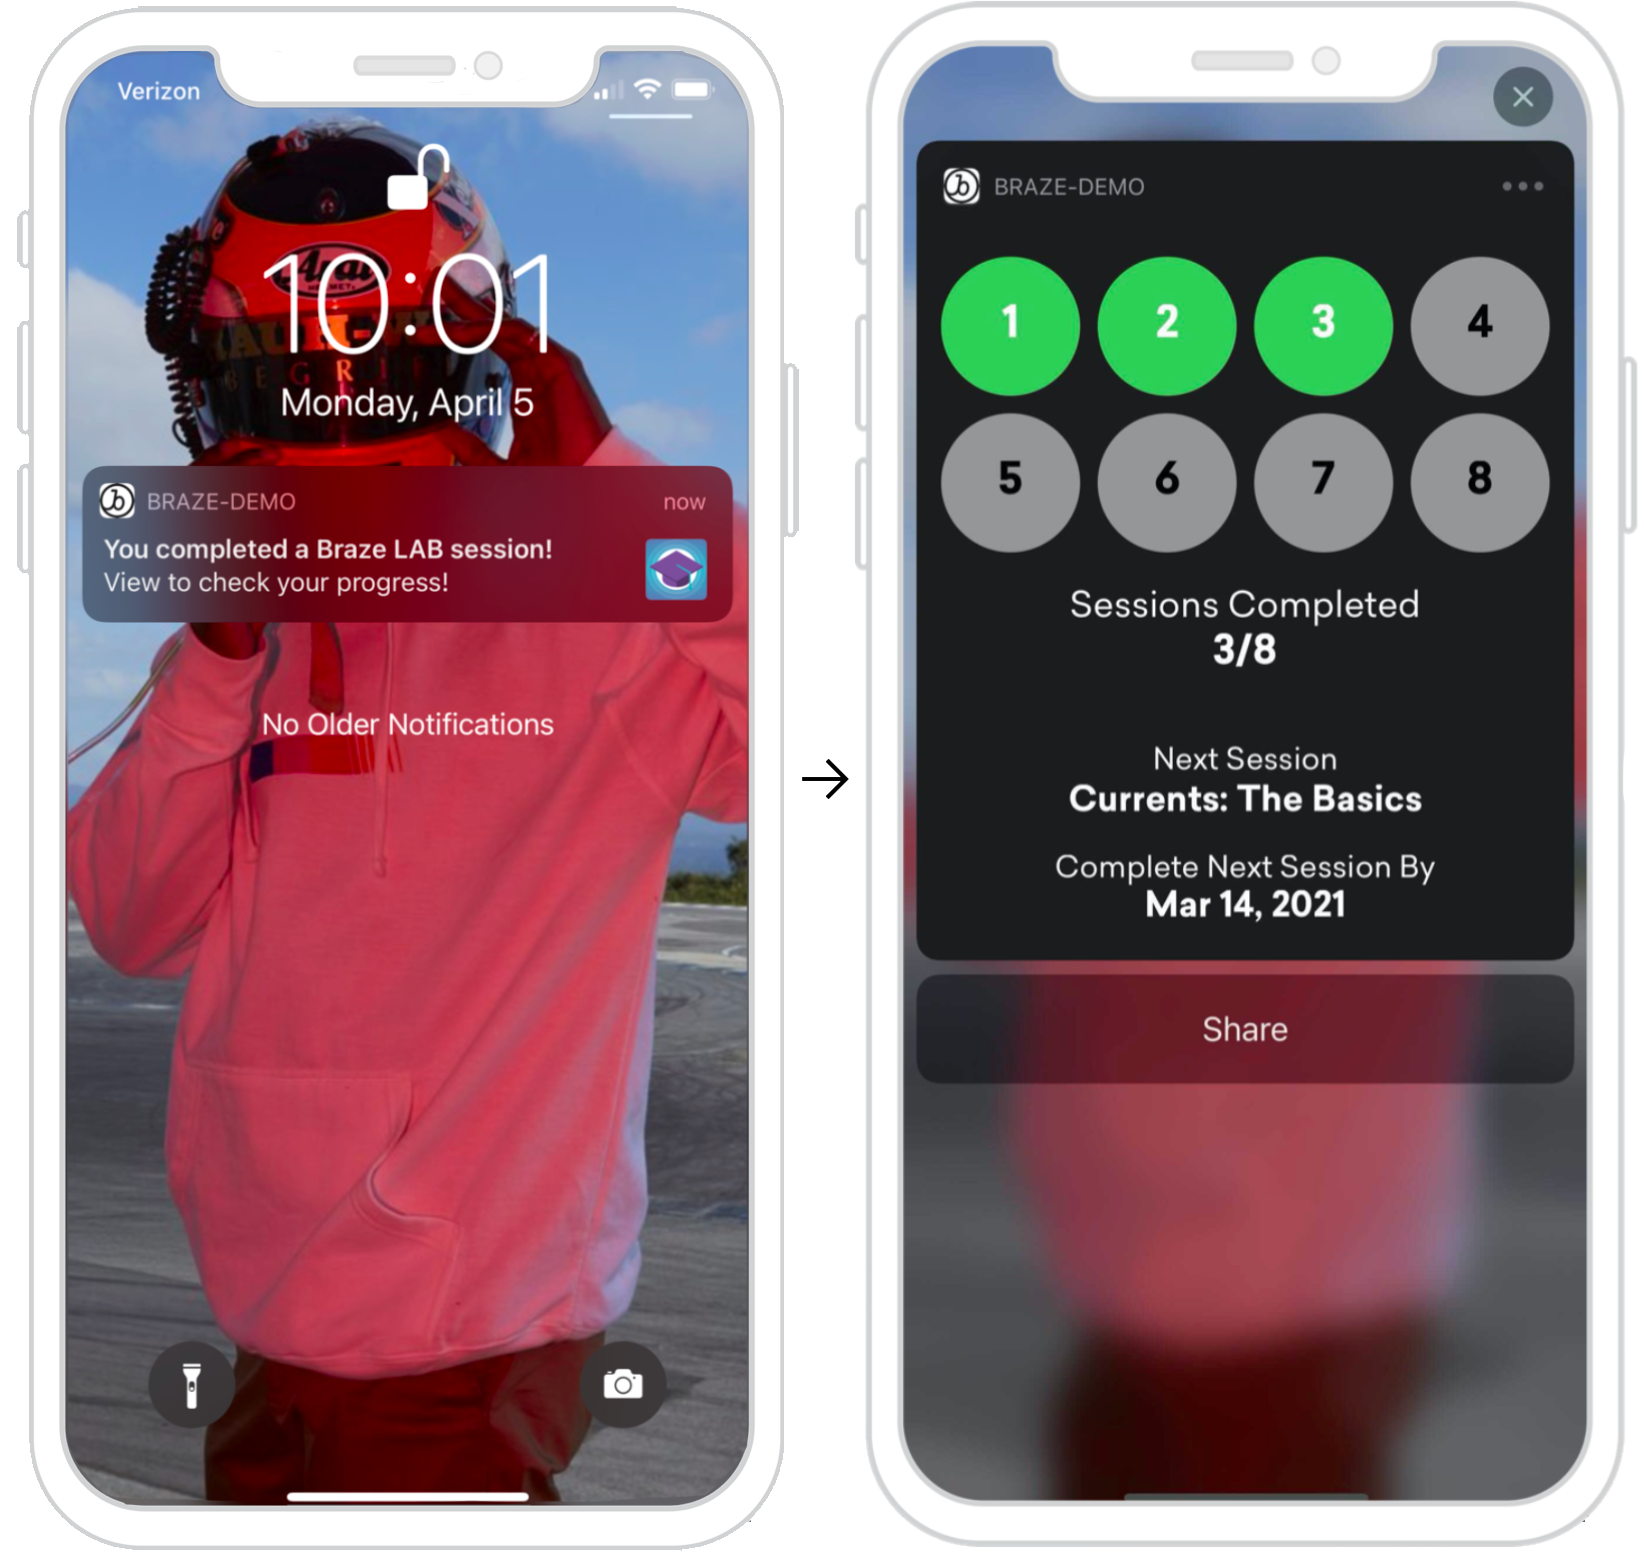 Two iPhones displayed side-by-side. The first iPhone shows the unexpanded view of the push message. The second iPhone shows the expanded version of the push message displaying a "progress" shot of how far they are through a course, the name of the next session, and when the next session must be completed.